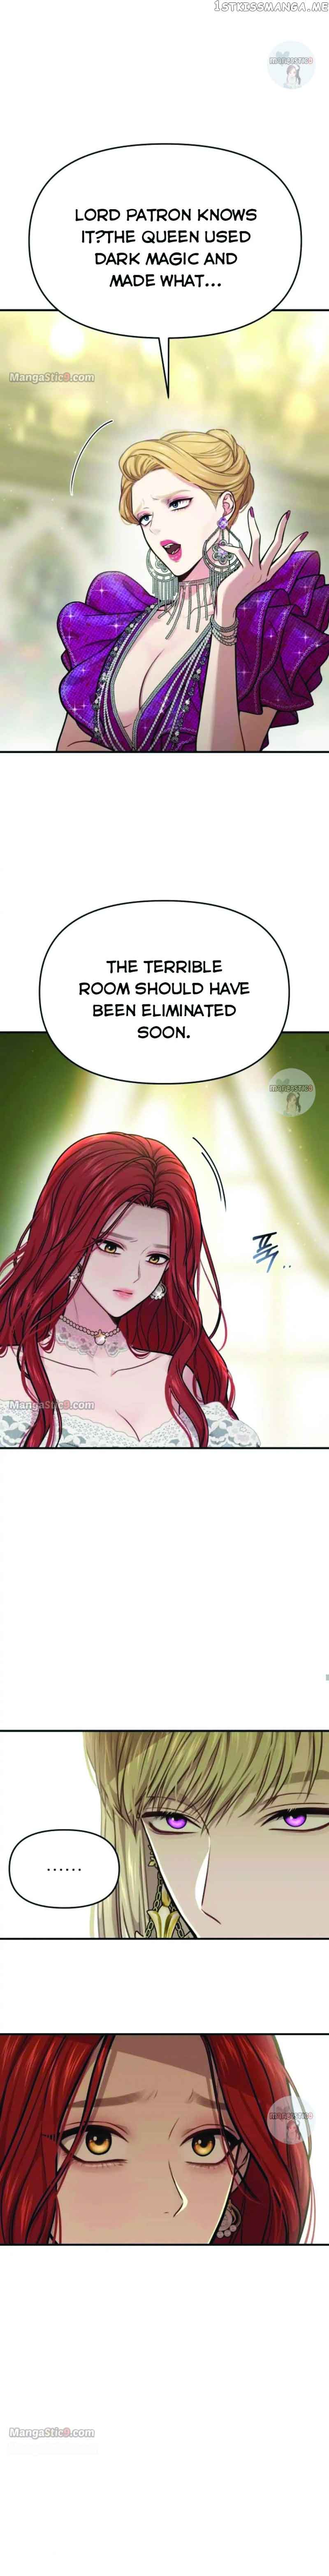 The Secret Bedroom of a Dejected Royal Daughter chapter 35